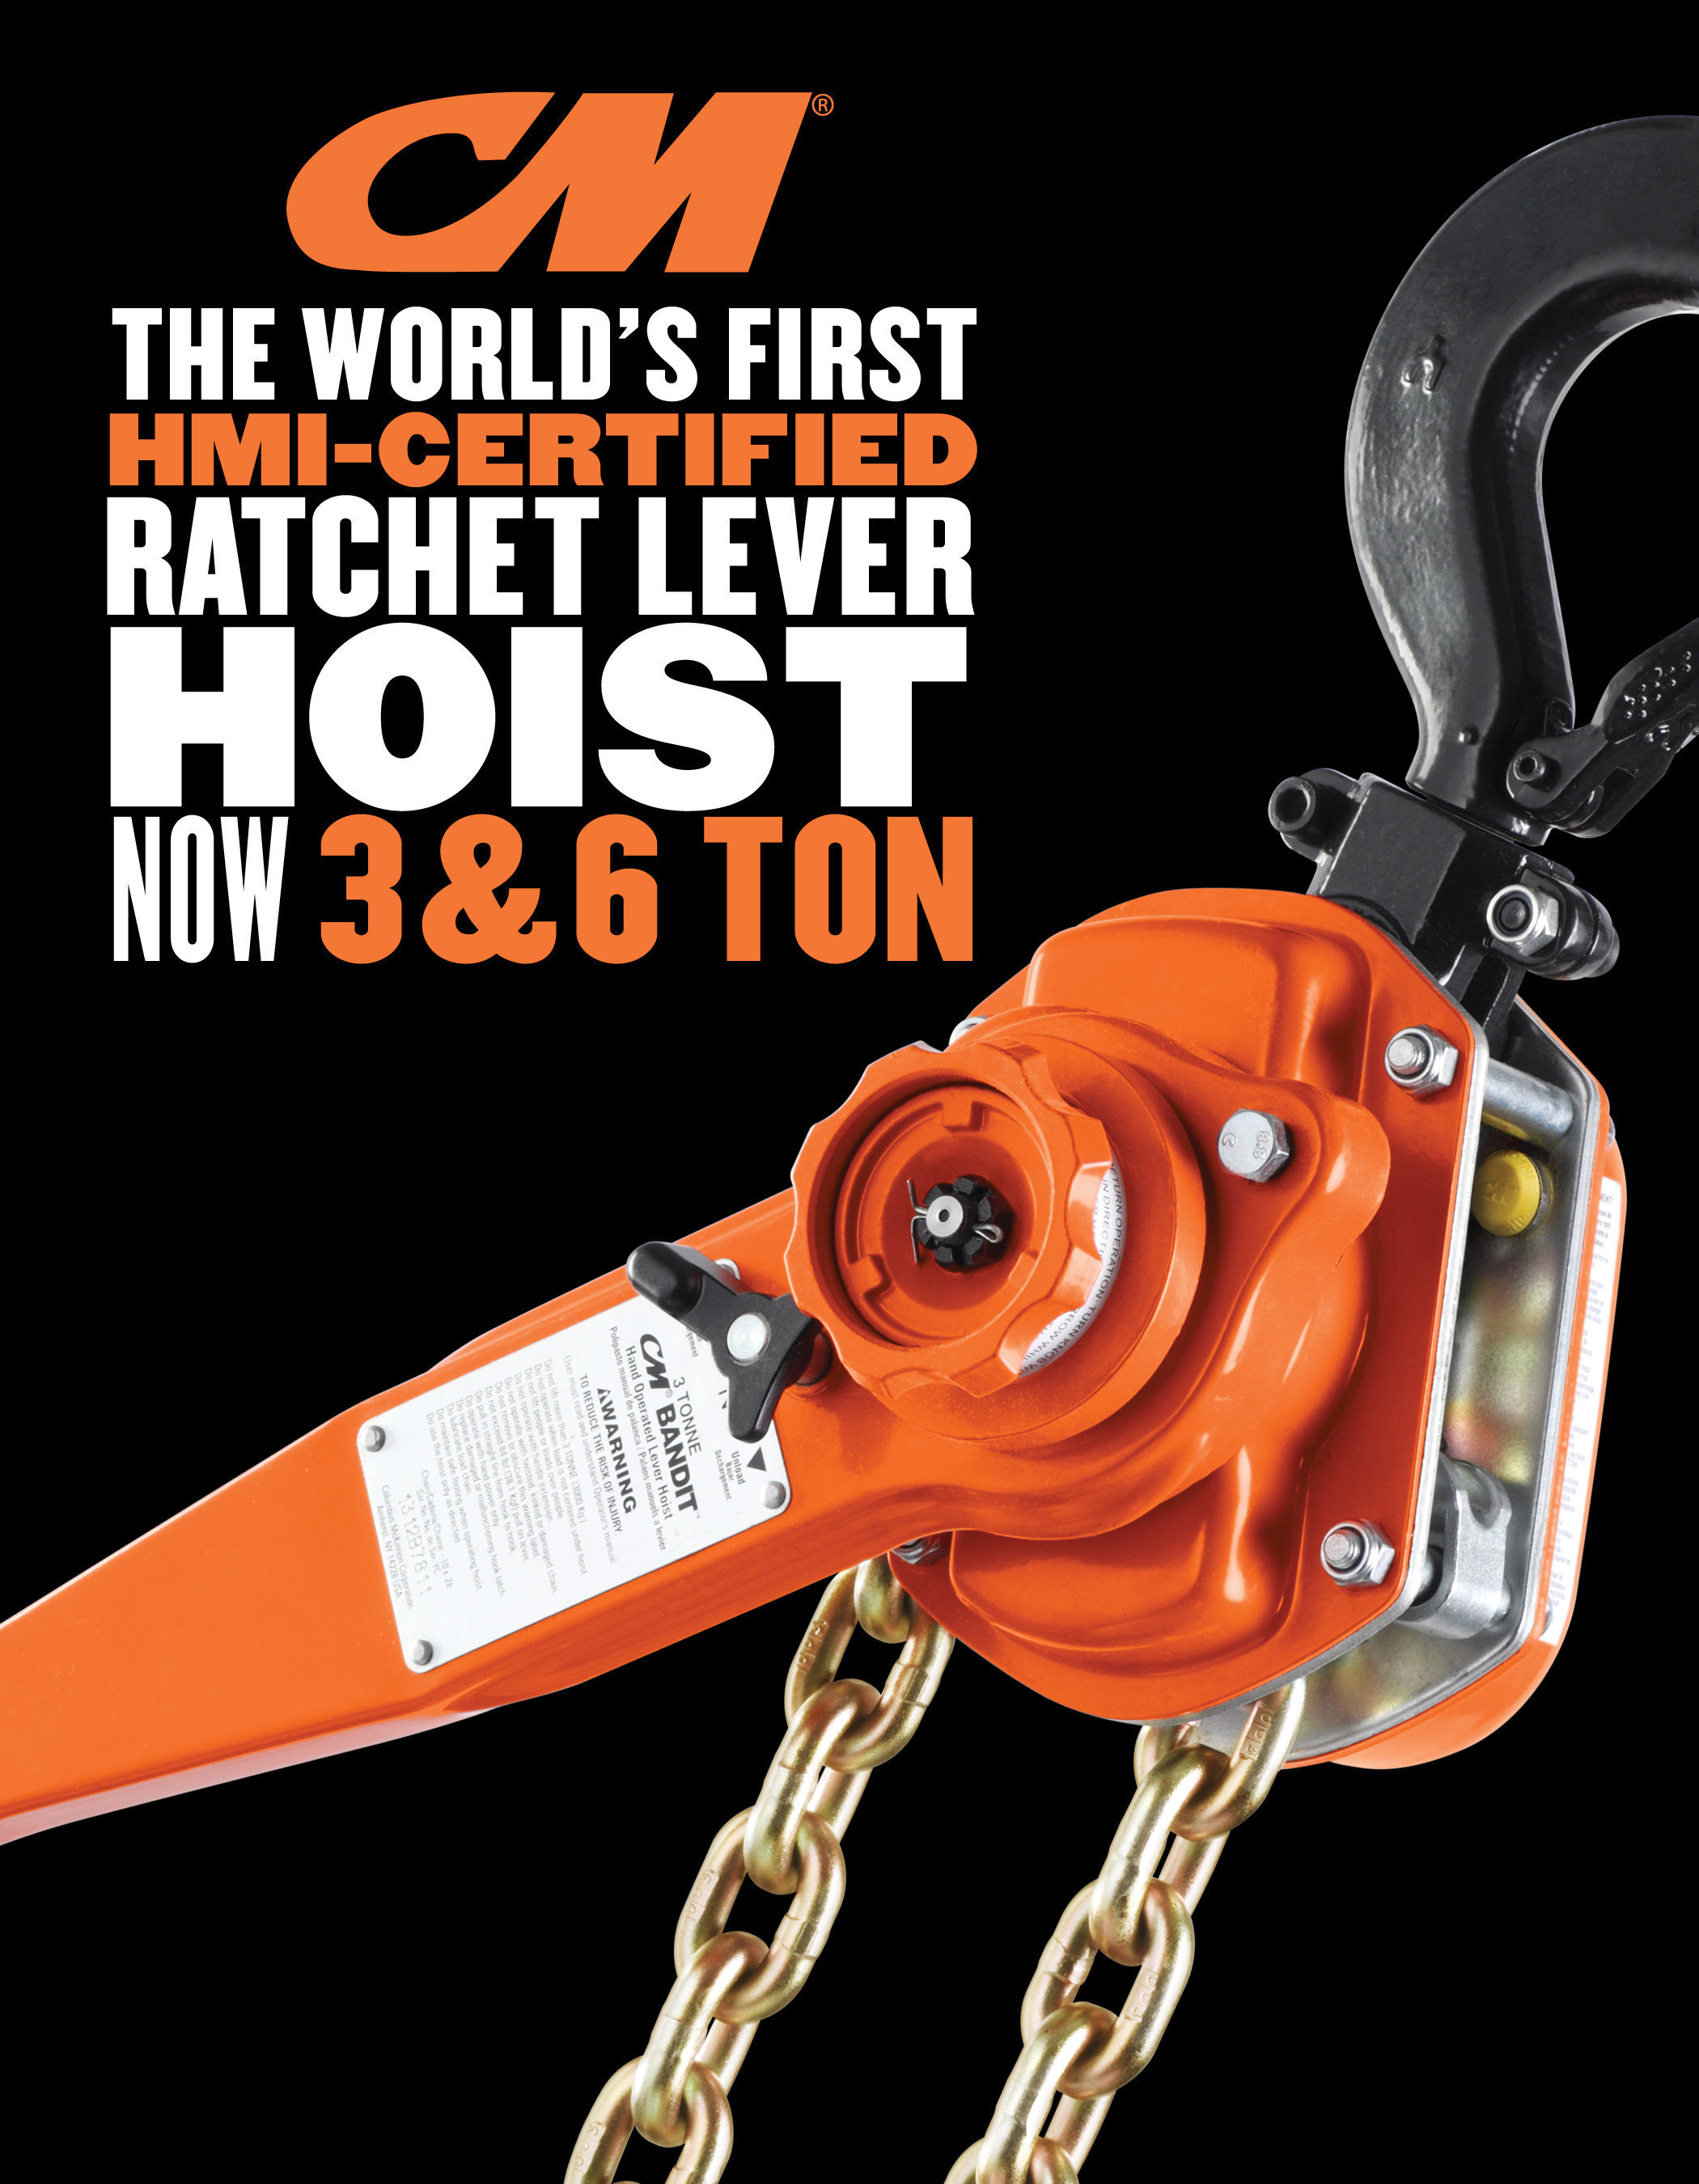 The CM Bandit was designed and built with one purpose - to be the best ratchet lever hoist in the global marketplace. Now available in 3 and 6 ton capacities, the CM Bandit is the world's first HMI-certified ratchet lever hoist and one of the most versatile hoists in the industry. This addition complements Columbus McKinnon Corporation's current offering of 3/4 and 1-1/2 ton units. The compact and durable CM Bandit is available with RFID technology, corrosion-resistant gold chromate chain and bolt-on hooks for easy inspection.